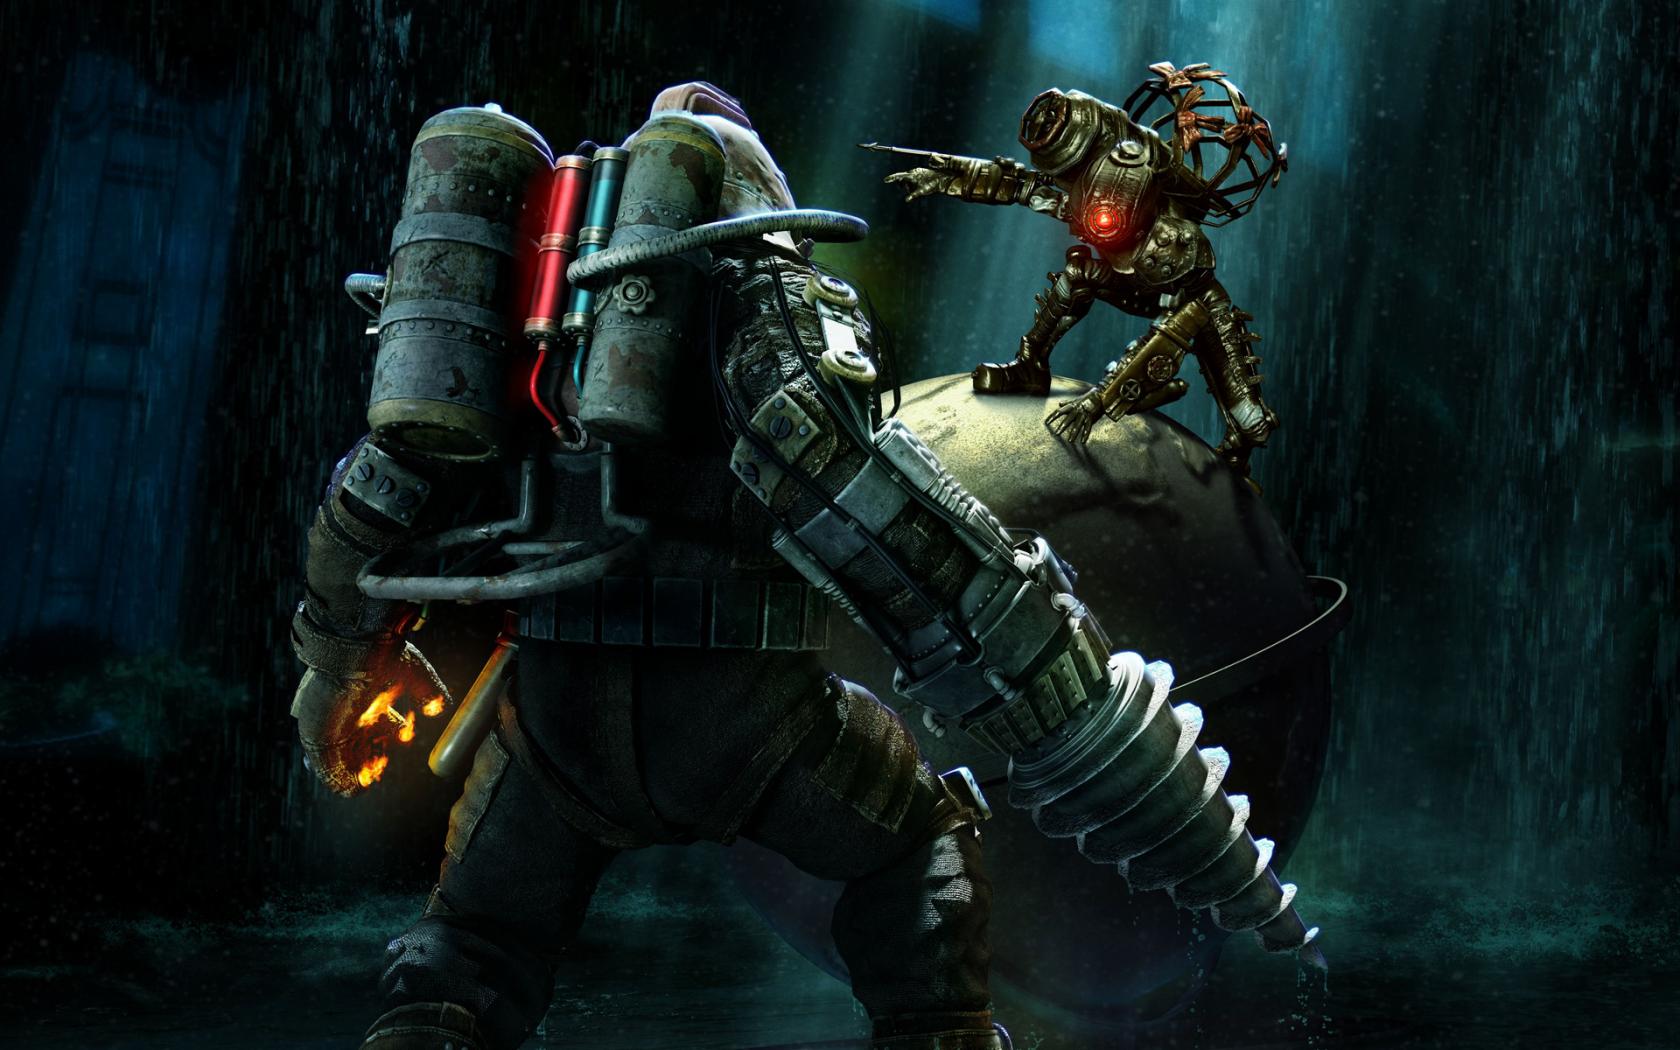 Bioshock 2 Is Free To Plus Members This Week While Far Cry 3 Gets